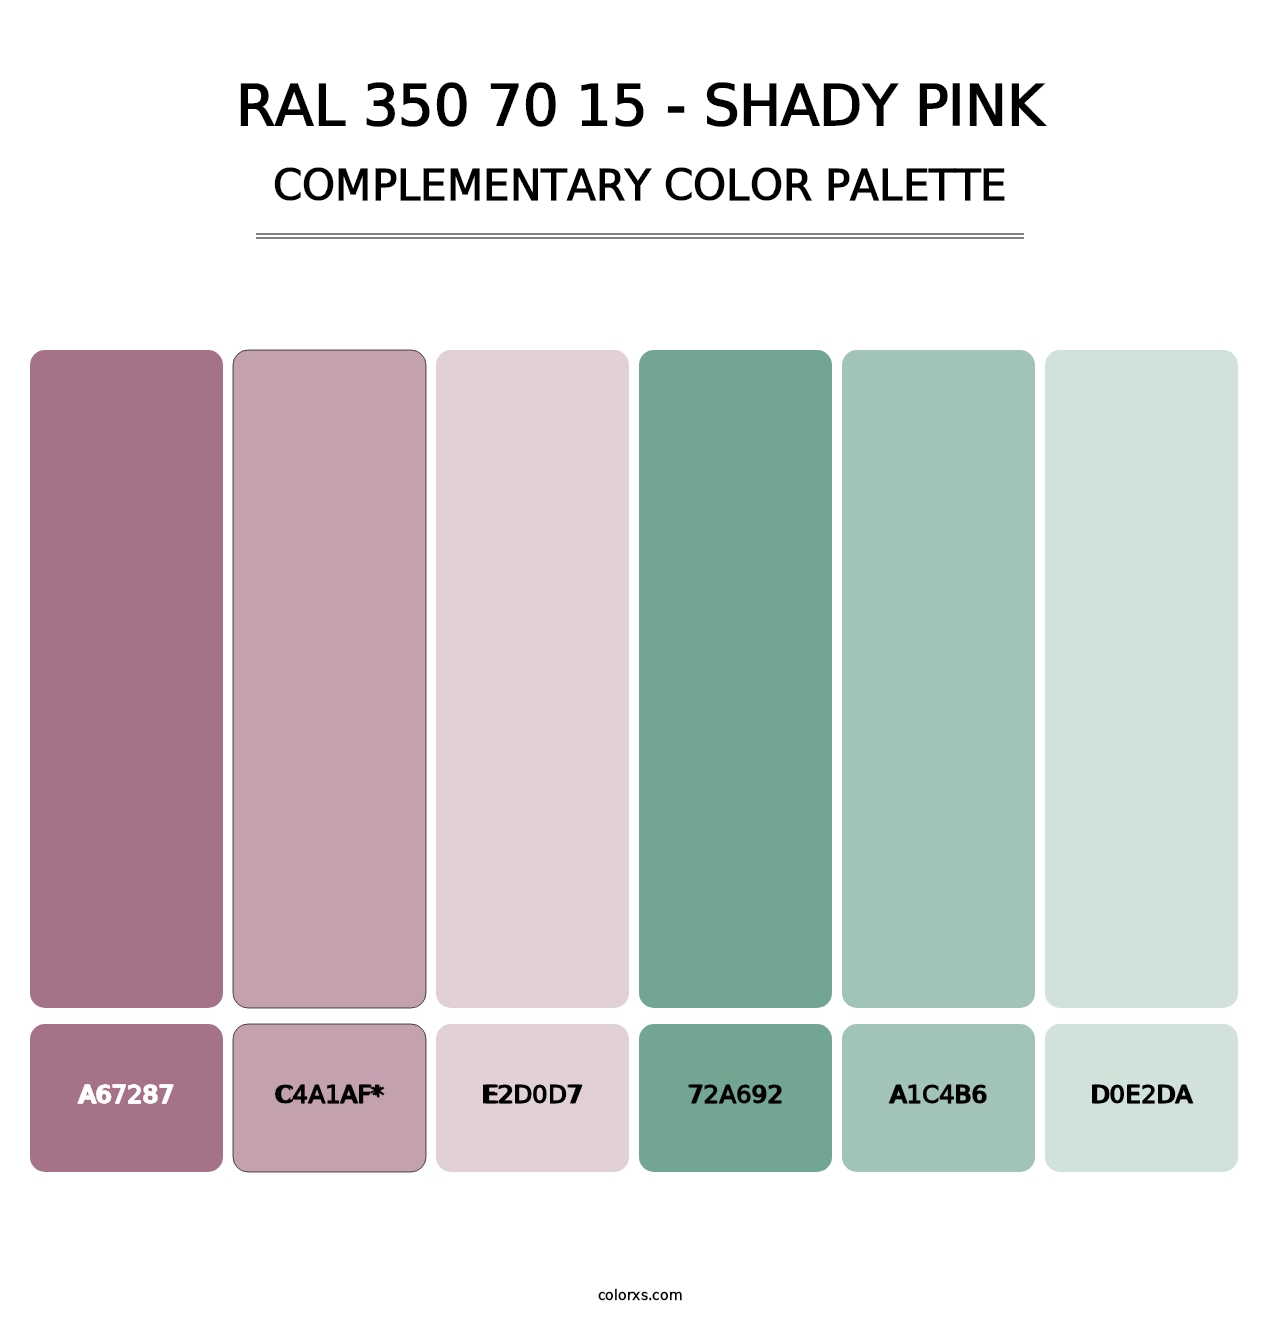 RAL 350 70 15 - Shady Pink - Complementary Color Palette